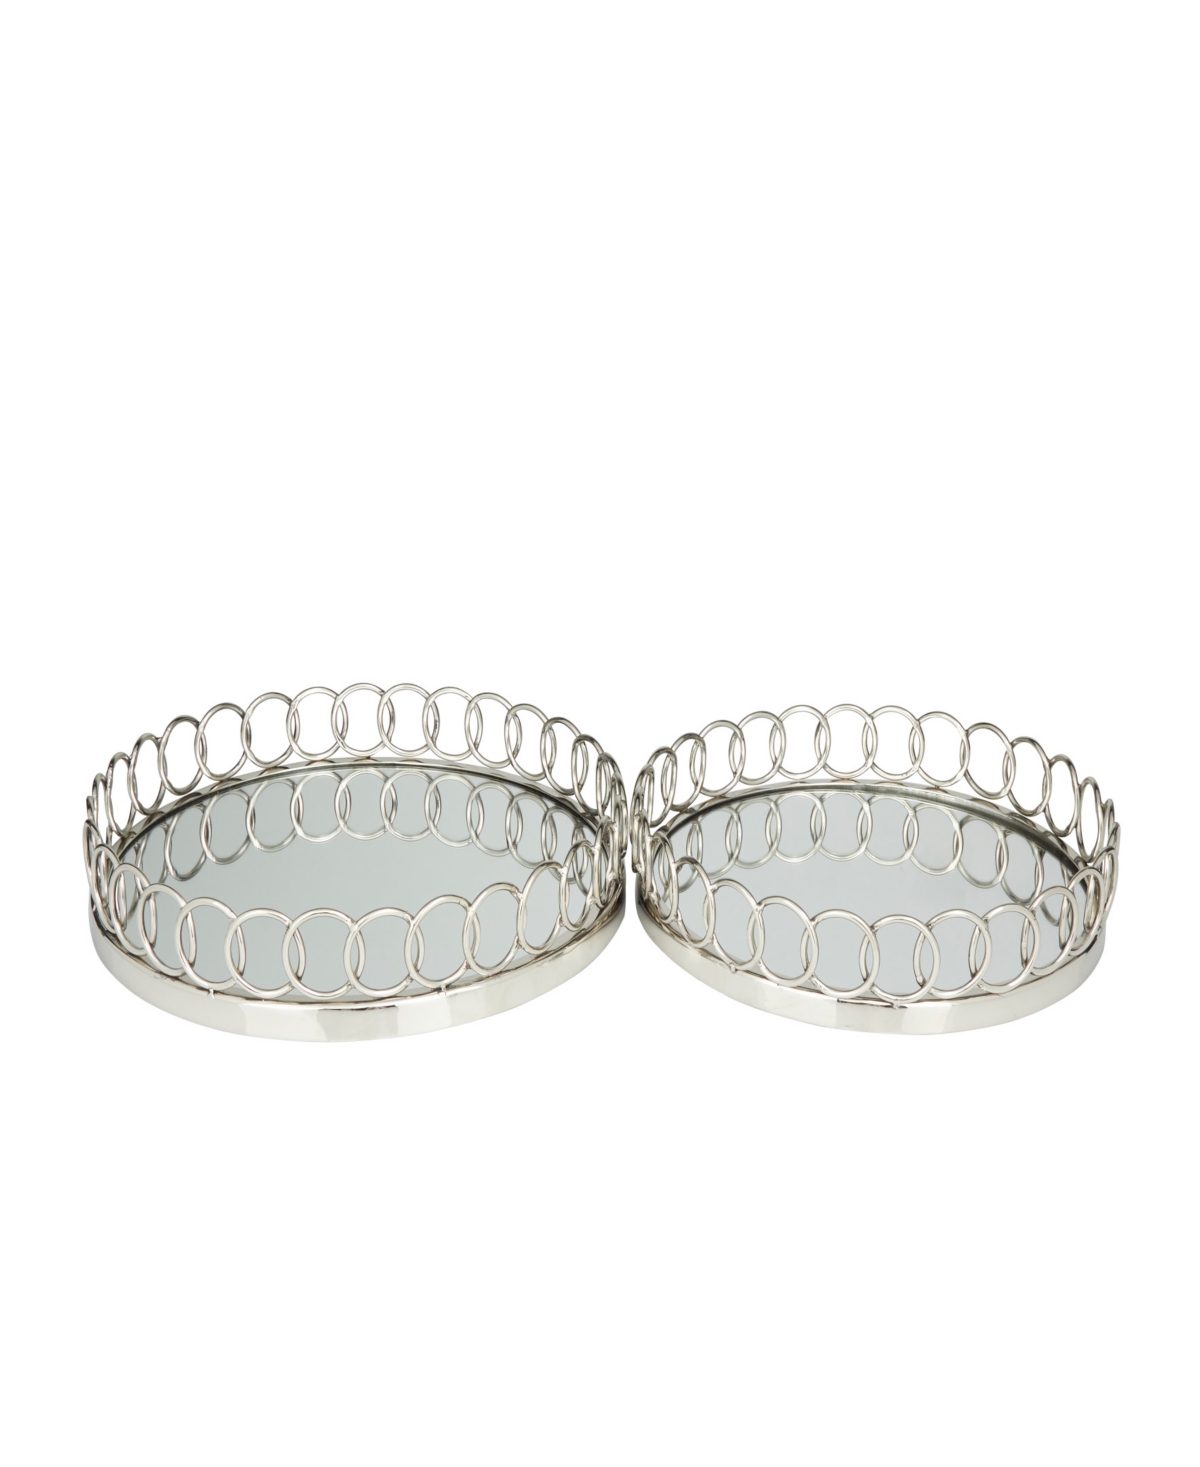 Rosemary Lane Stainless Steel Mirrored Tray With Circle Patterned Sides, Set Of 2, 16", 14" W In Silver